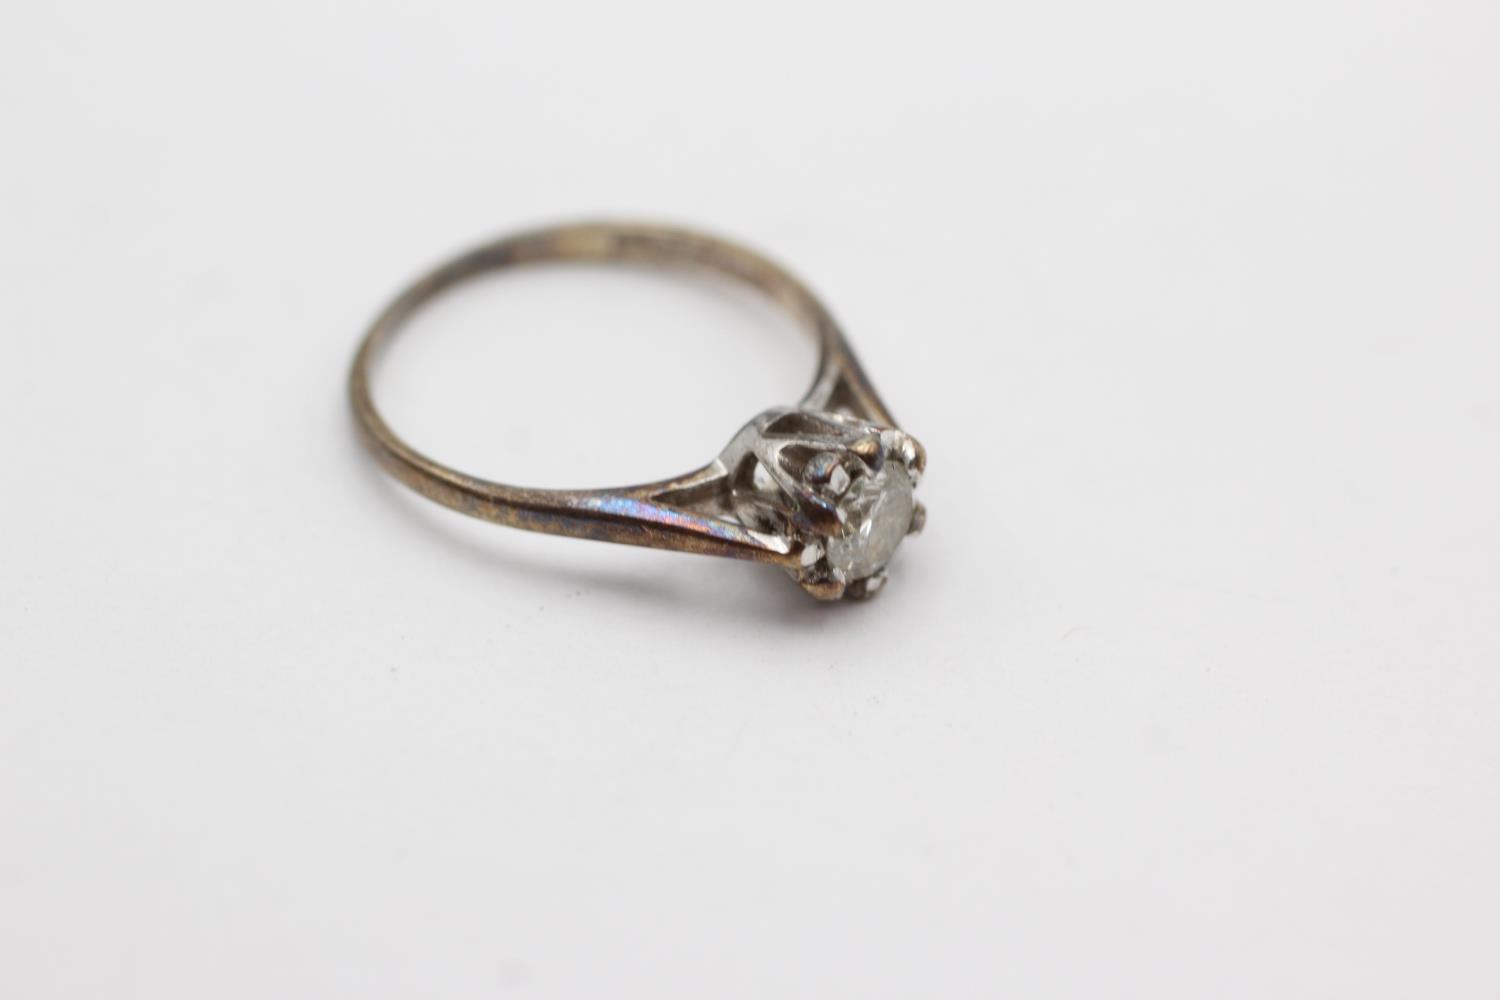 9ct gold diamond solitaire ring (1.9g) Size L - Image 2 of 4